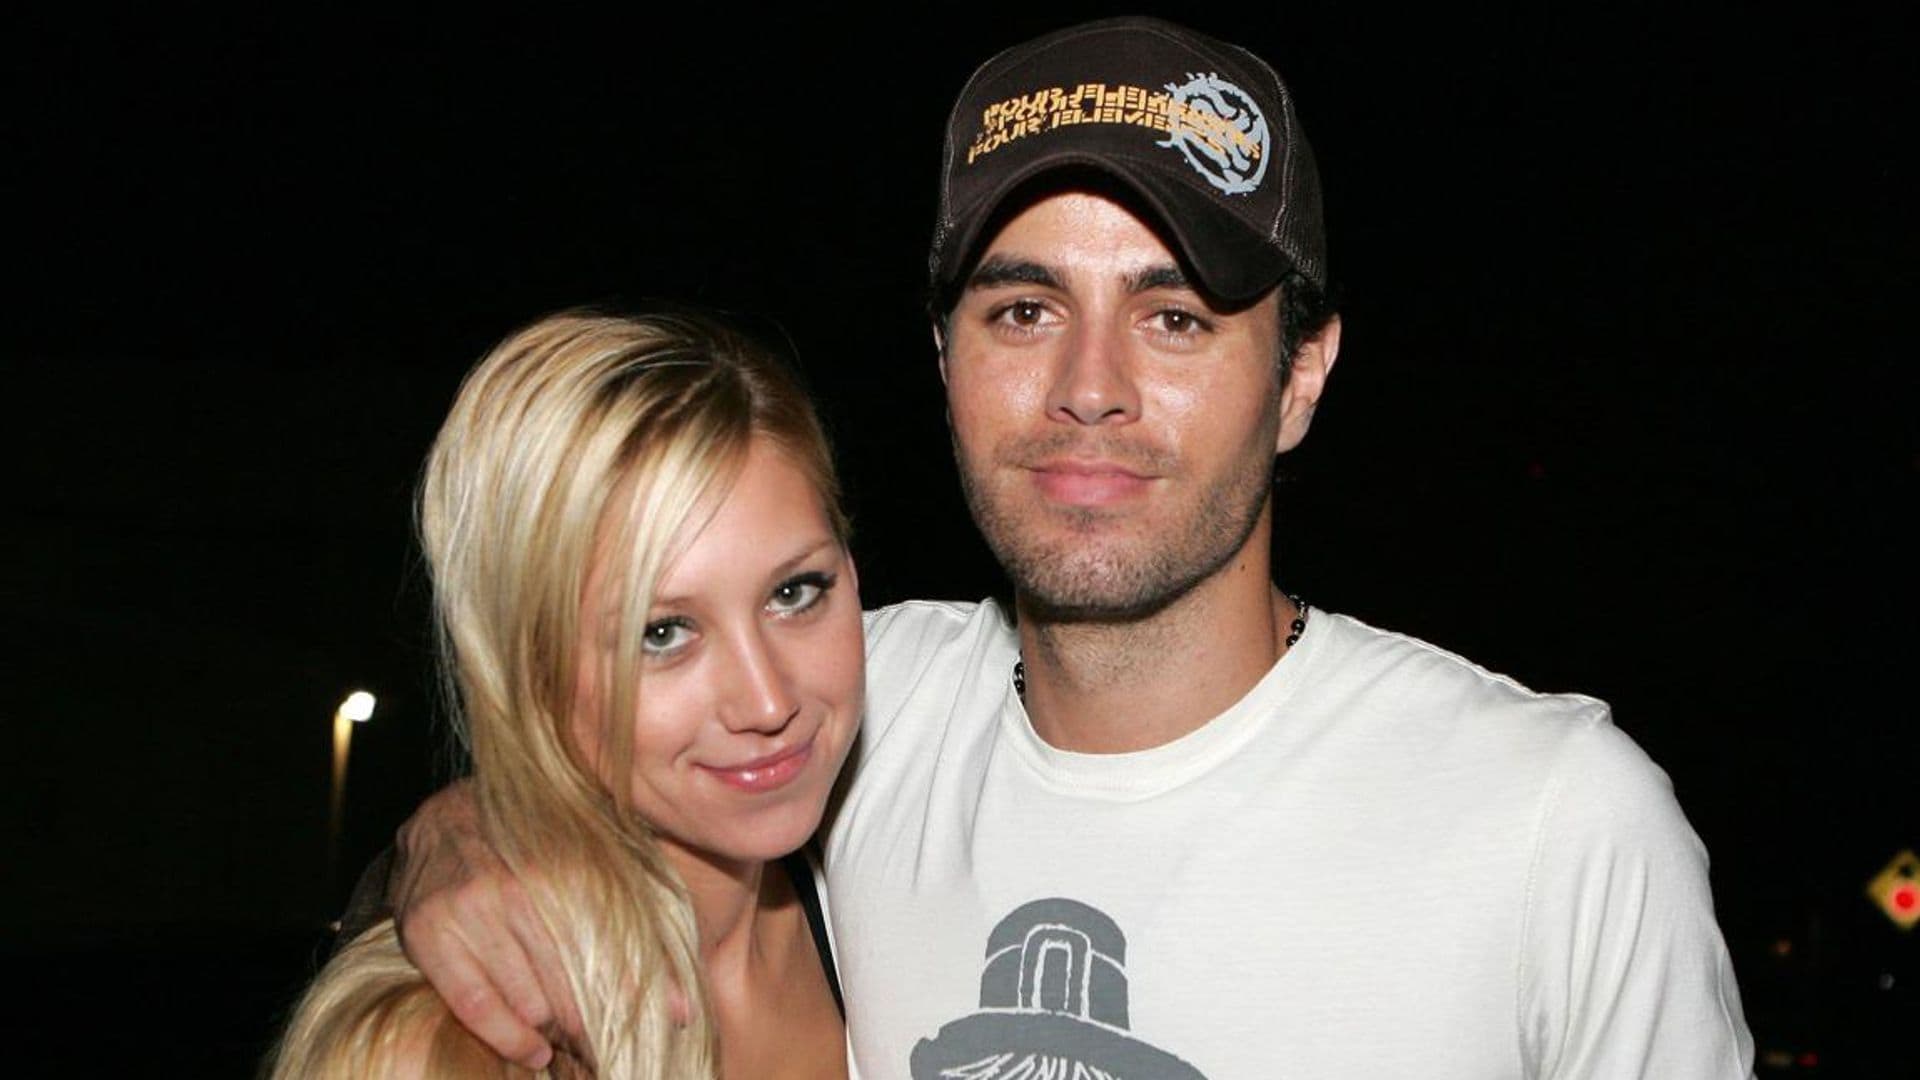 Here’s the major clue that has fans thinking Enrique Iglesias and Anna Kournikova are married